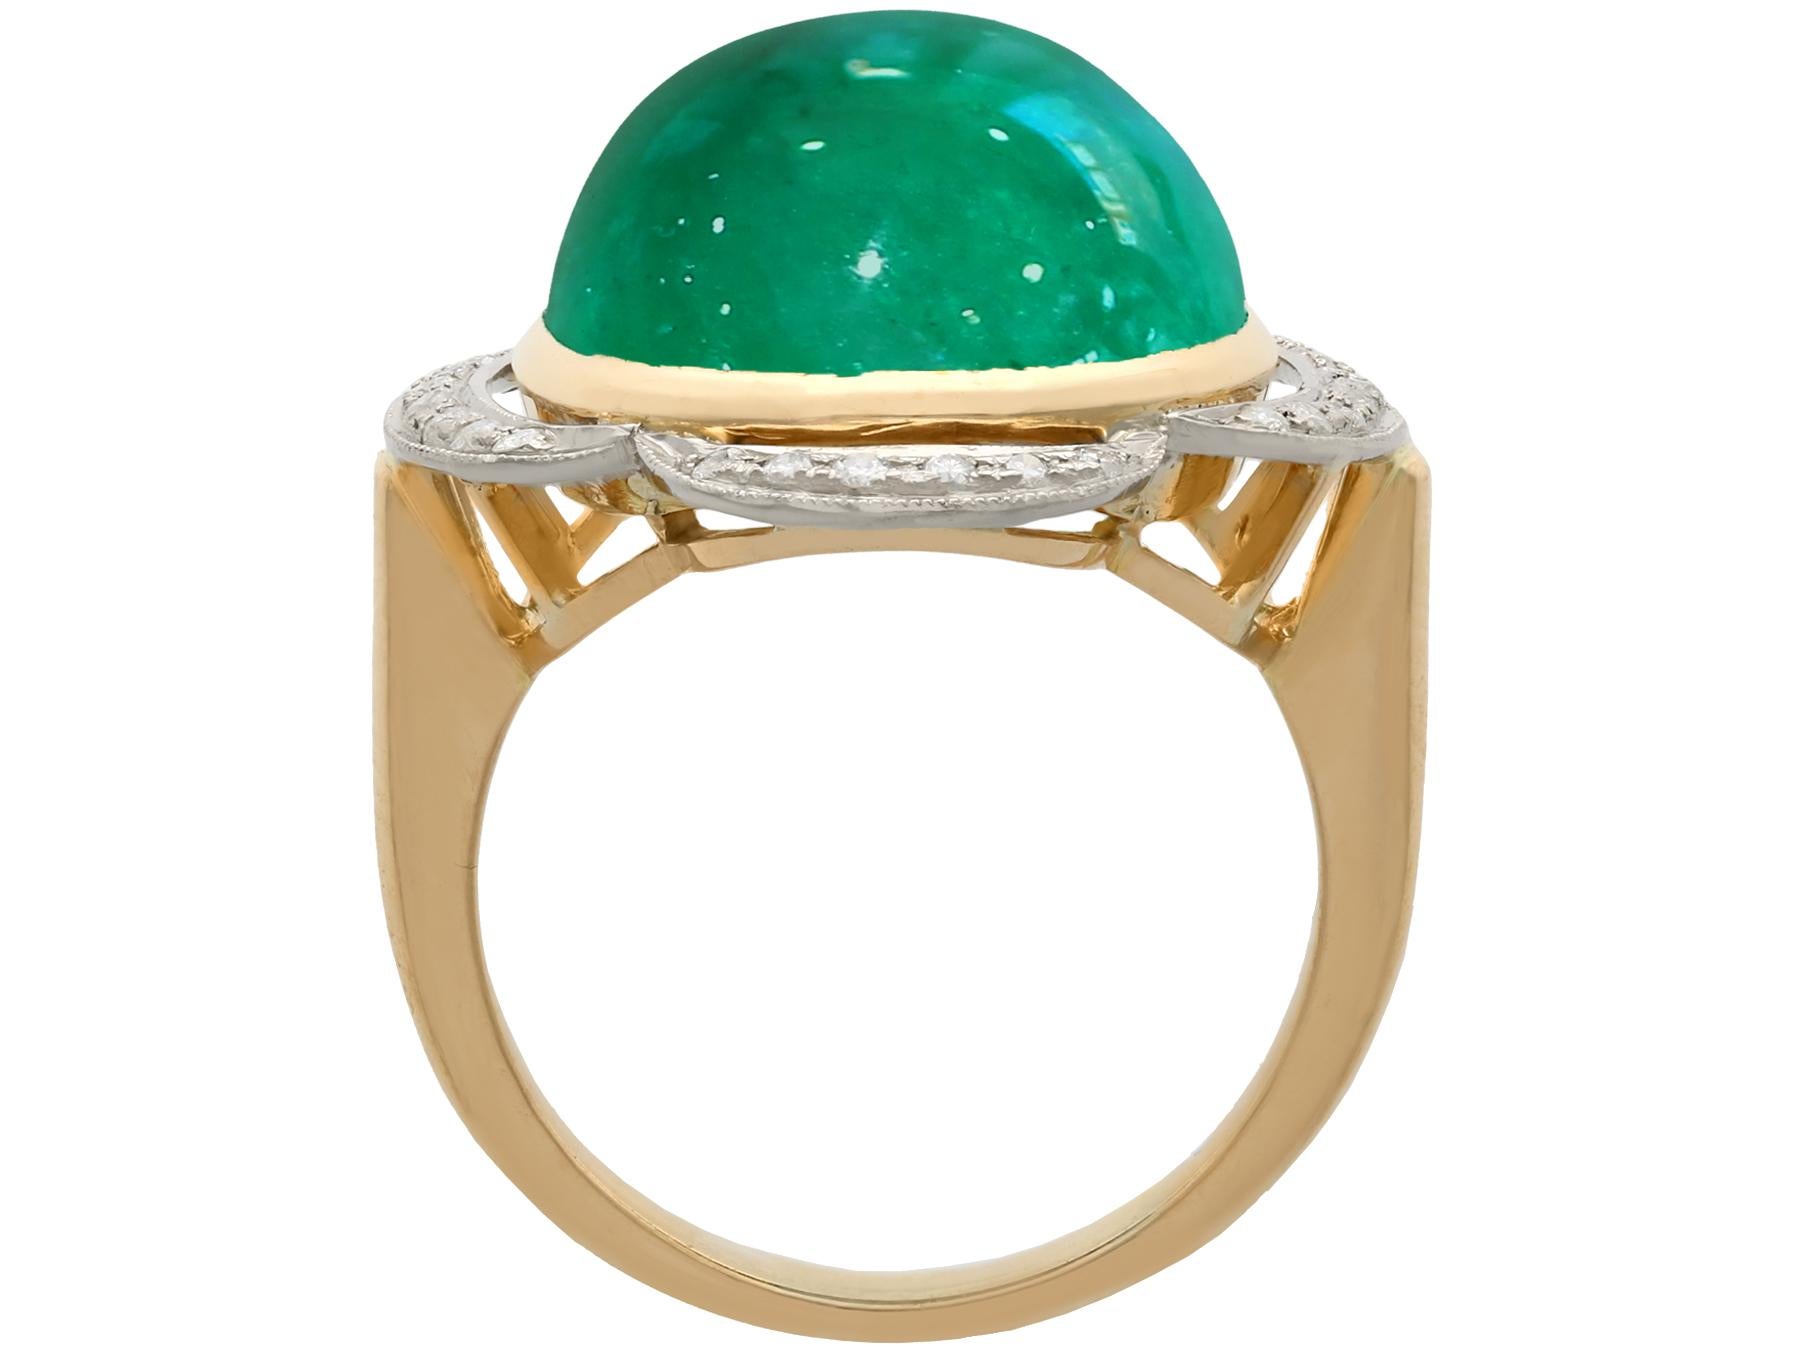 Vintage 1940s 14.5ct Cabochon Cut Emerald and Diamond Yellow Gold Cocktail Ring For Sale 1